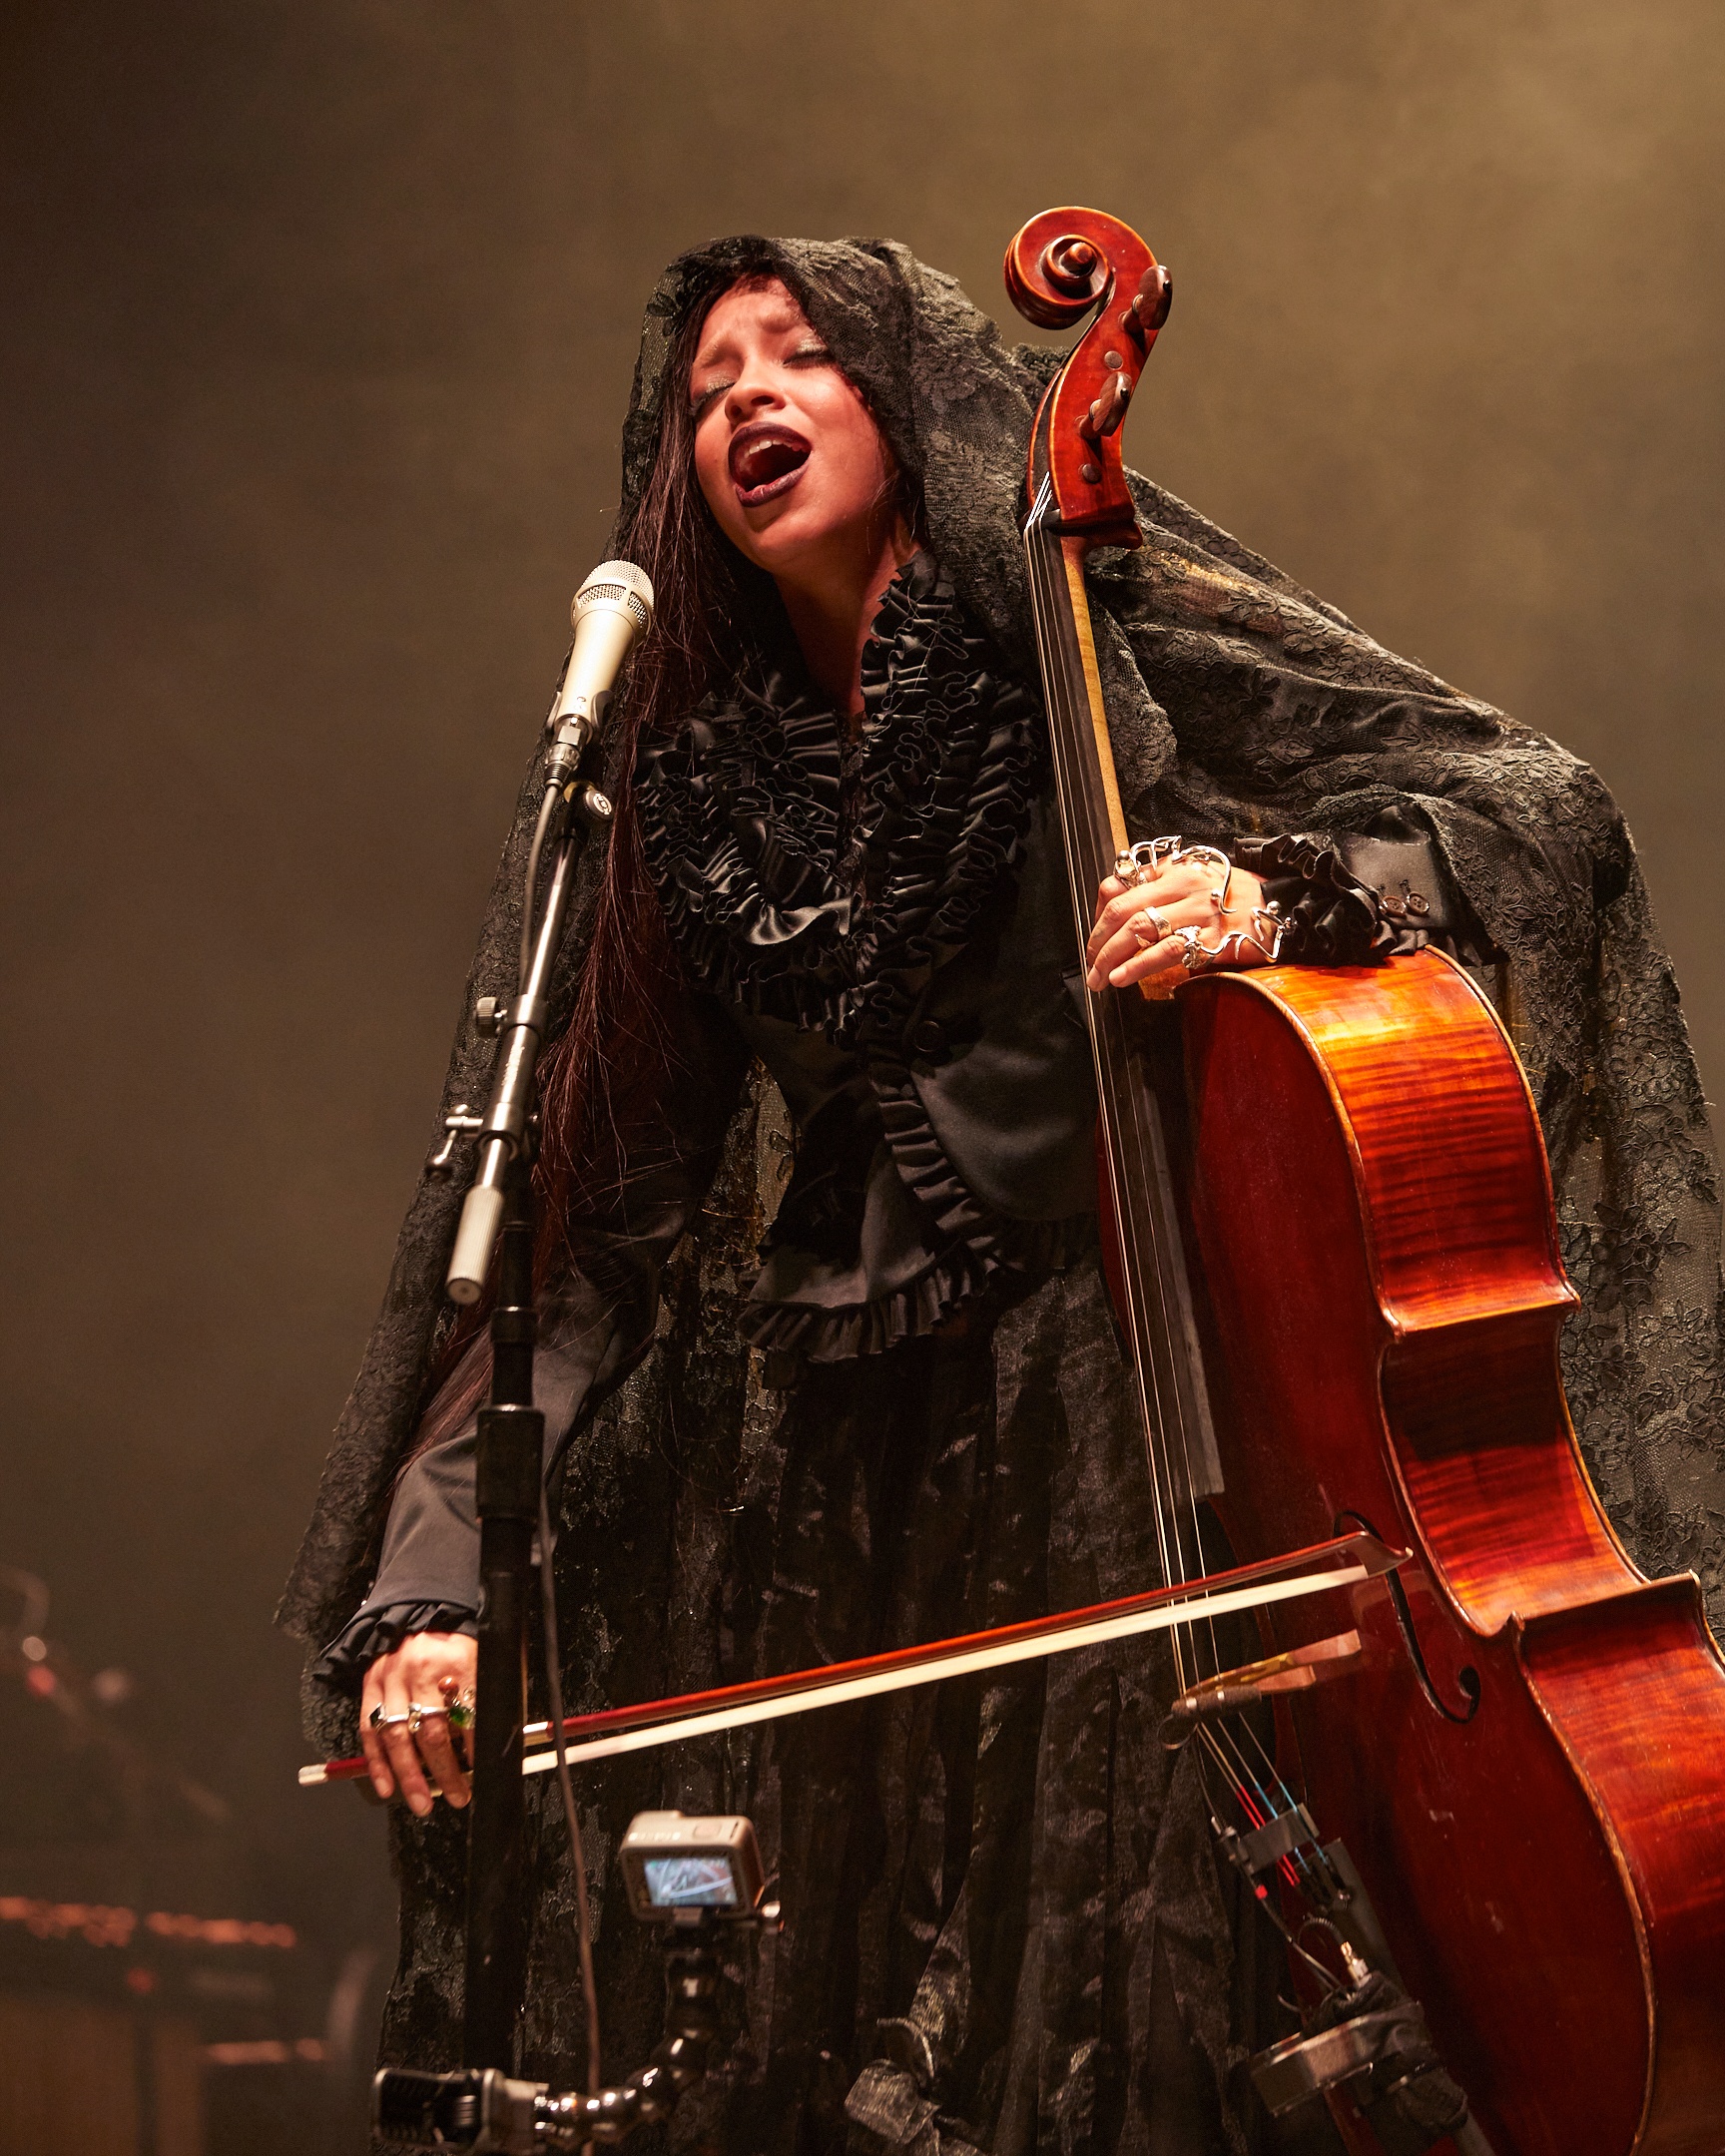 A Black person, the artist Kelsey Lu, performing on stage in front of a microphone that they sing into. They are wearing a black ruffled dress and lace scarf over their head, while holding a cello upright and playing it.